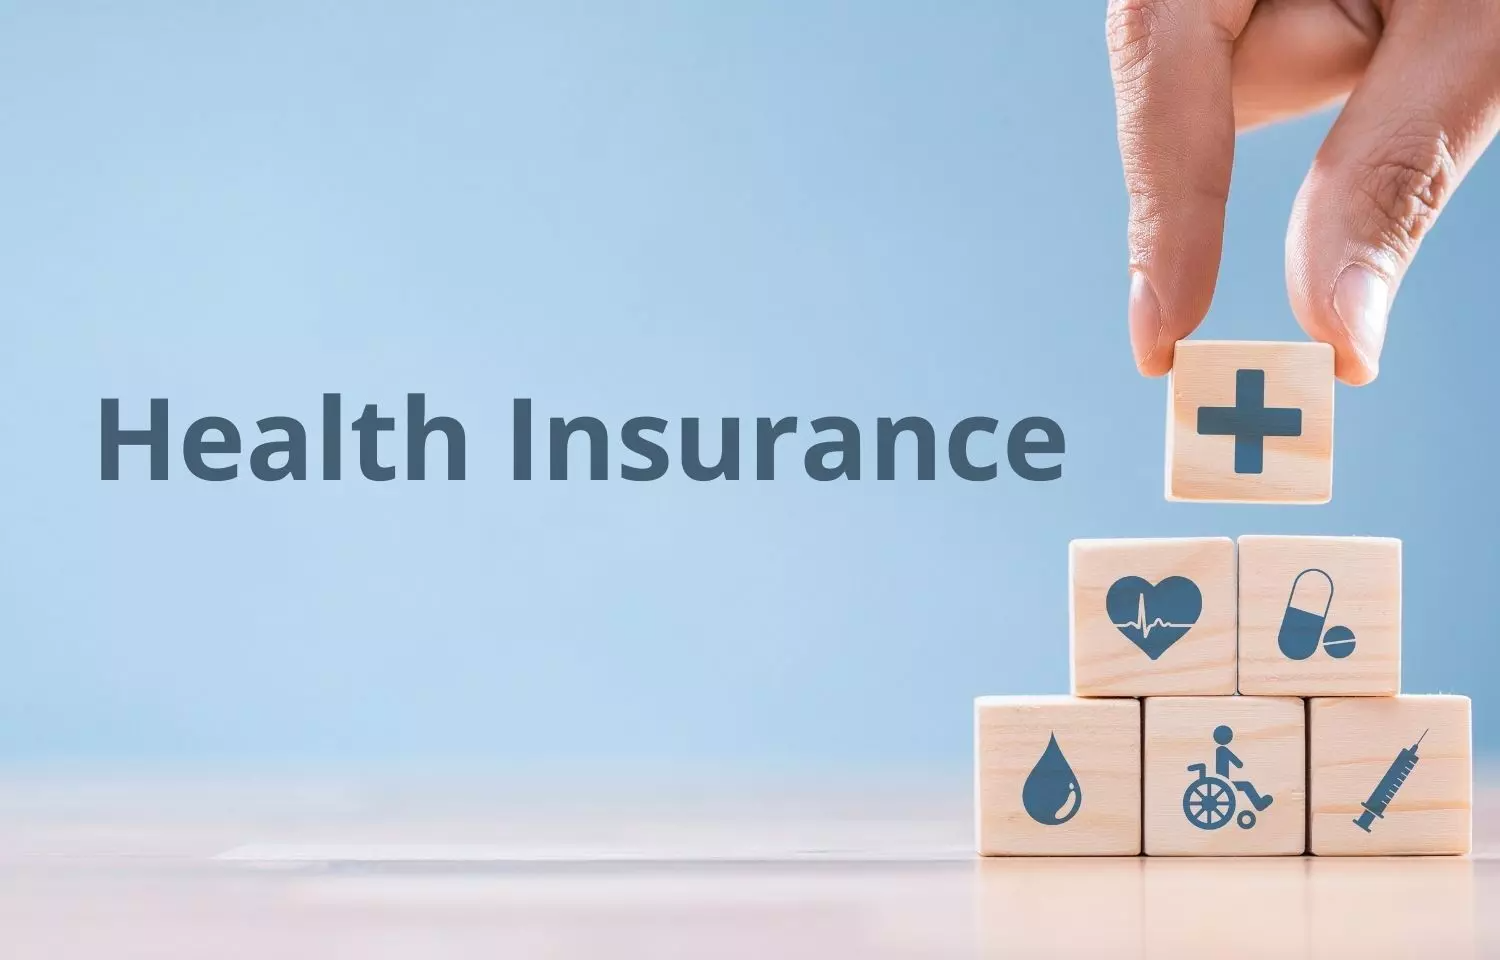 Things No One Tells You About Buying Health Insurance